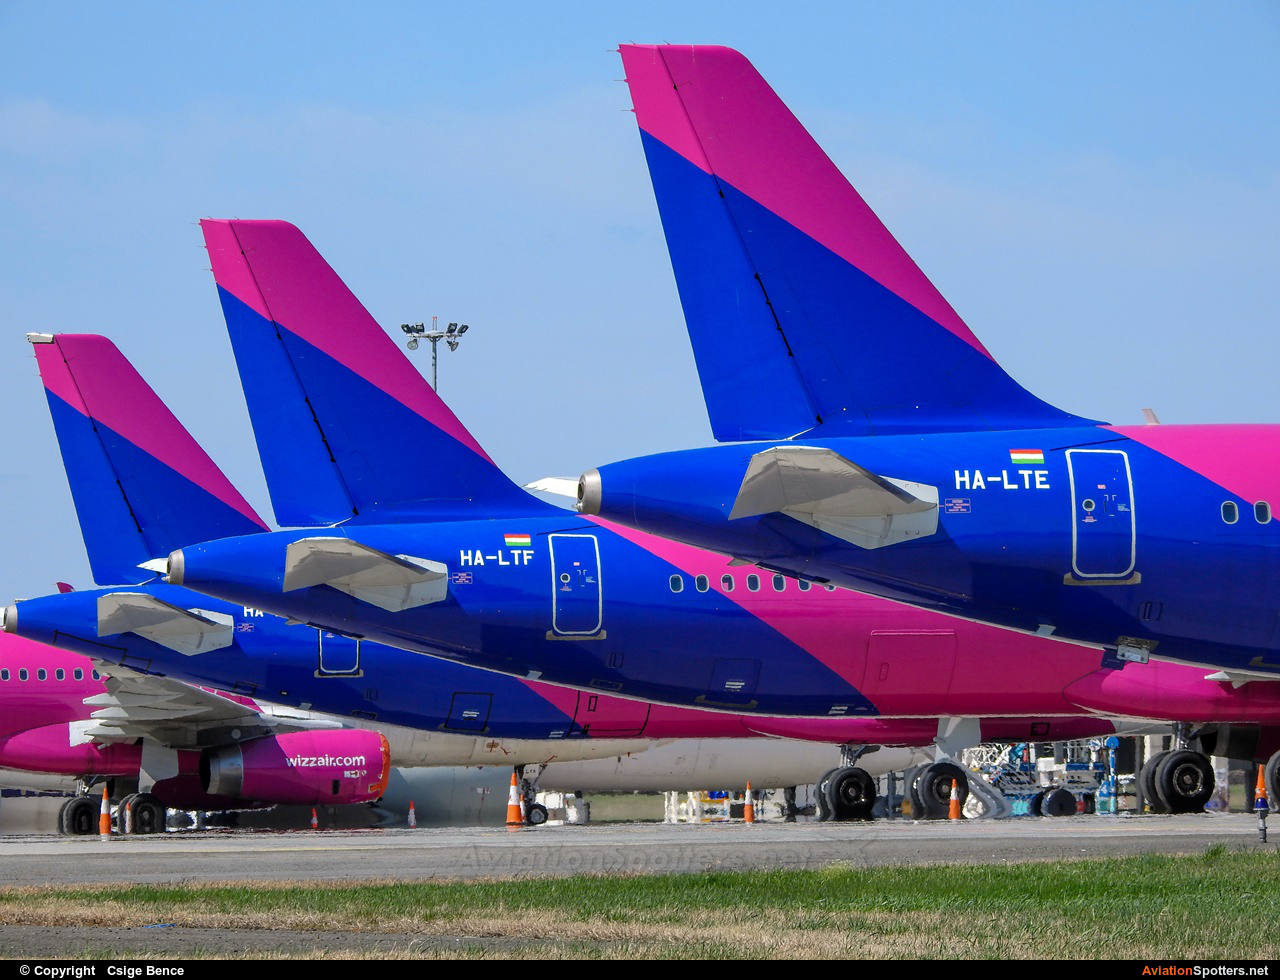 Wizz Air  -  A321-231  (HA-LTE) By Csige Bence (CsigeBence)